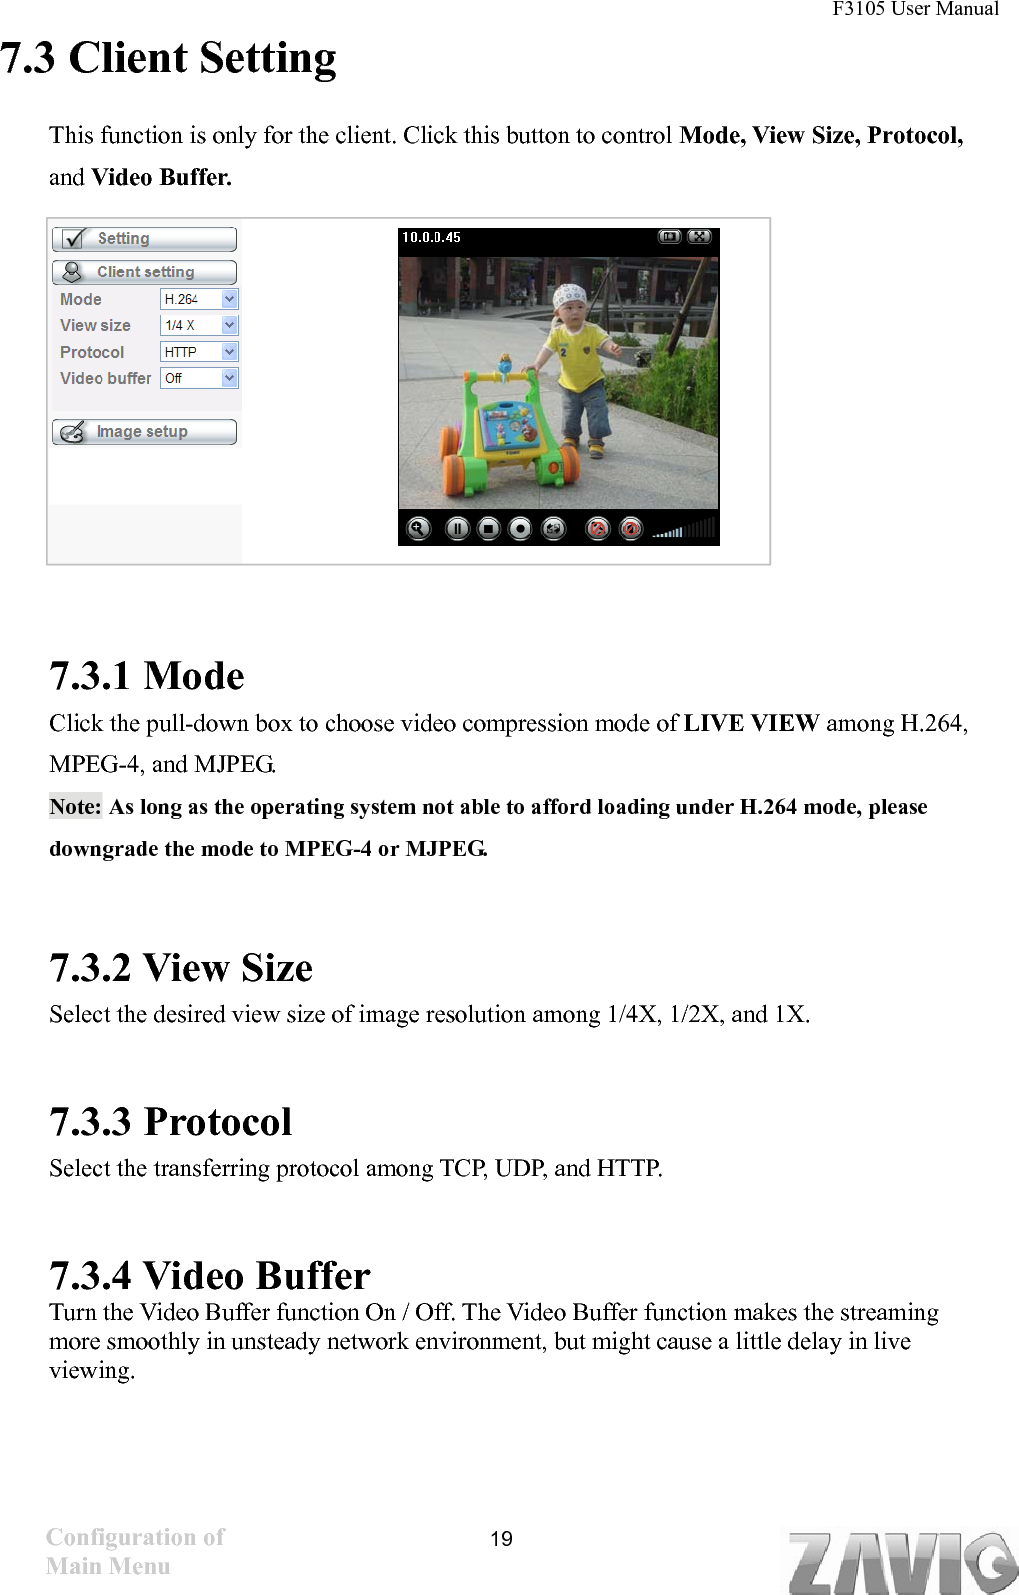 F3105 User Manual   7.3 Client Setting This function is only for the client. Click this button to control Mode, View Size, Protocol, and Video Buffer.          7.3.1 Mode Click the pull-down box to choose video compression mode of LIVE VIEW among H.264, MPEG-4, and MJPEG.   Note: As long as the operating system not able to afford loading under H.264 mode, please downgrade the mode to MPEG-4 or MJPEG.       7.3.2 View Size Select the desired view size of image resolution among 1/4X, 1/2X, and 1X.  7.3.3 Protocol Select the transferring protocol among TCP, UDP, and HTTP.      7.3.4 Video Buffer   Turn the Video Buffer function On / Off. The Video Buffer function makes the streaming more smoothly in unsteady network environment, but might cause a little delay in live viewing.Configuration of Main Menu  19